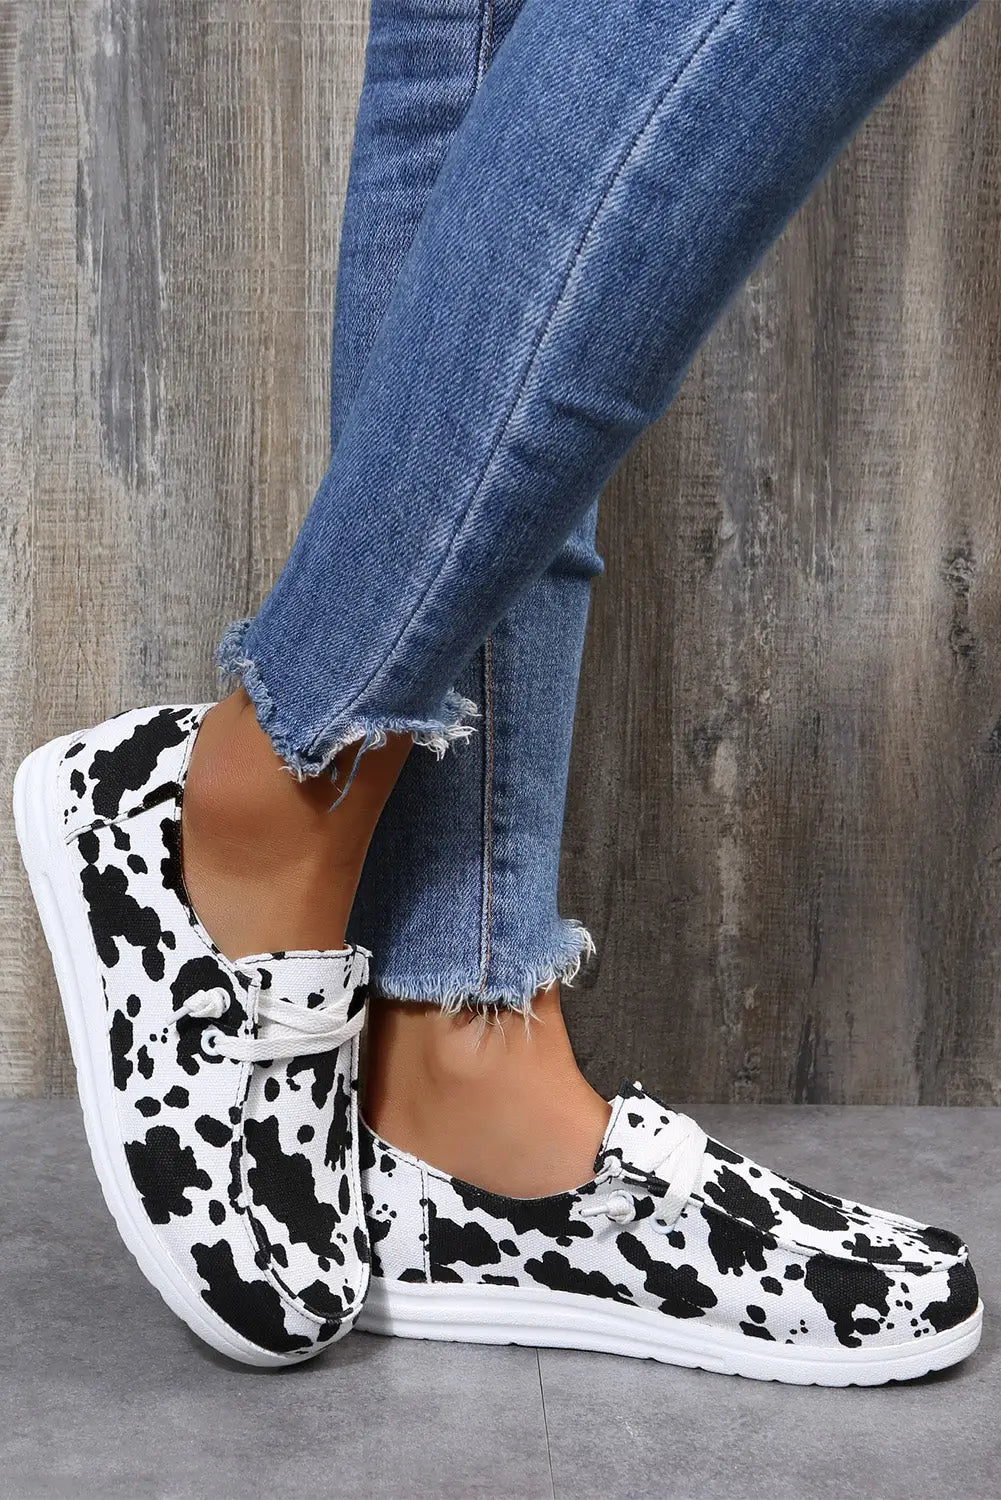 White cow print lace up round toe flat sneakers - 6 flats